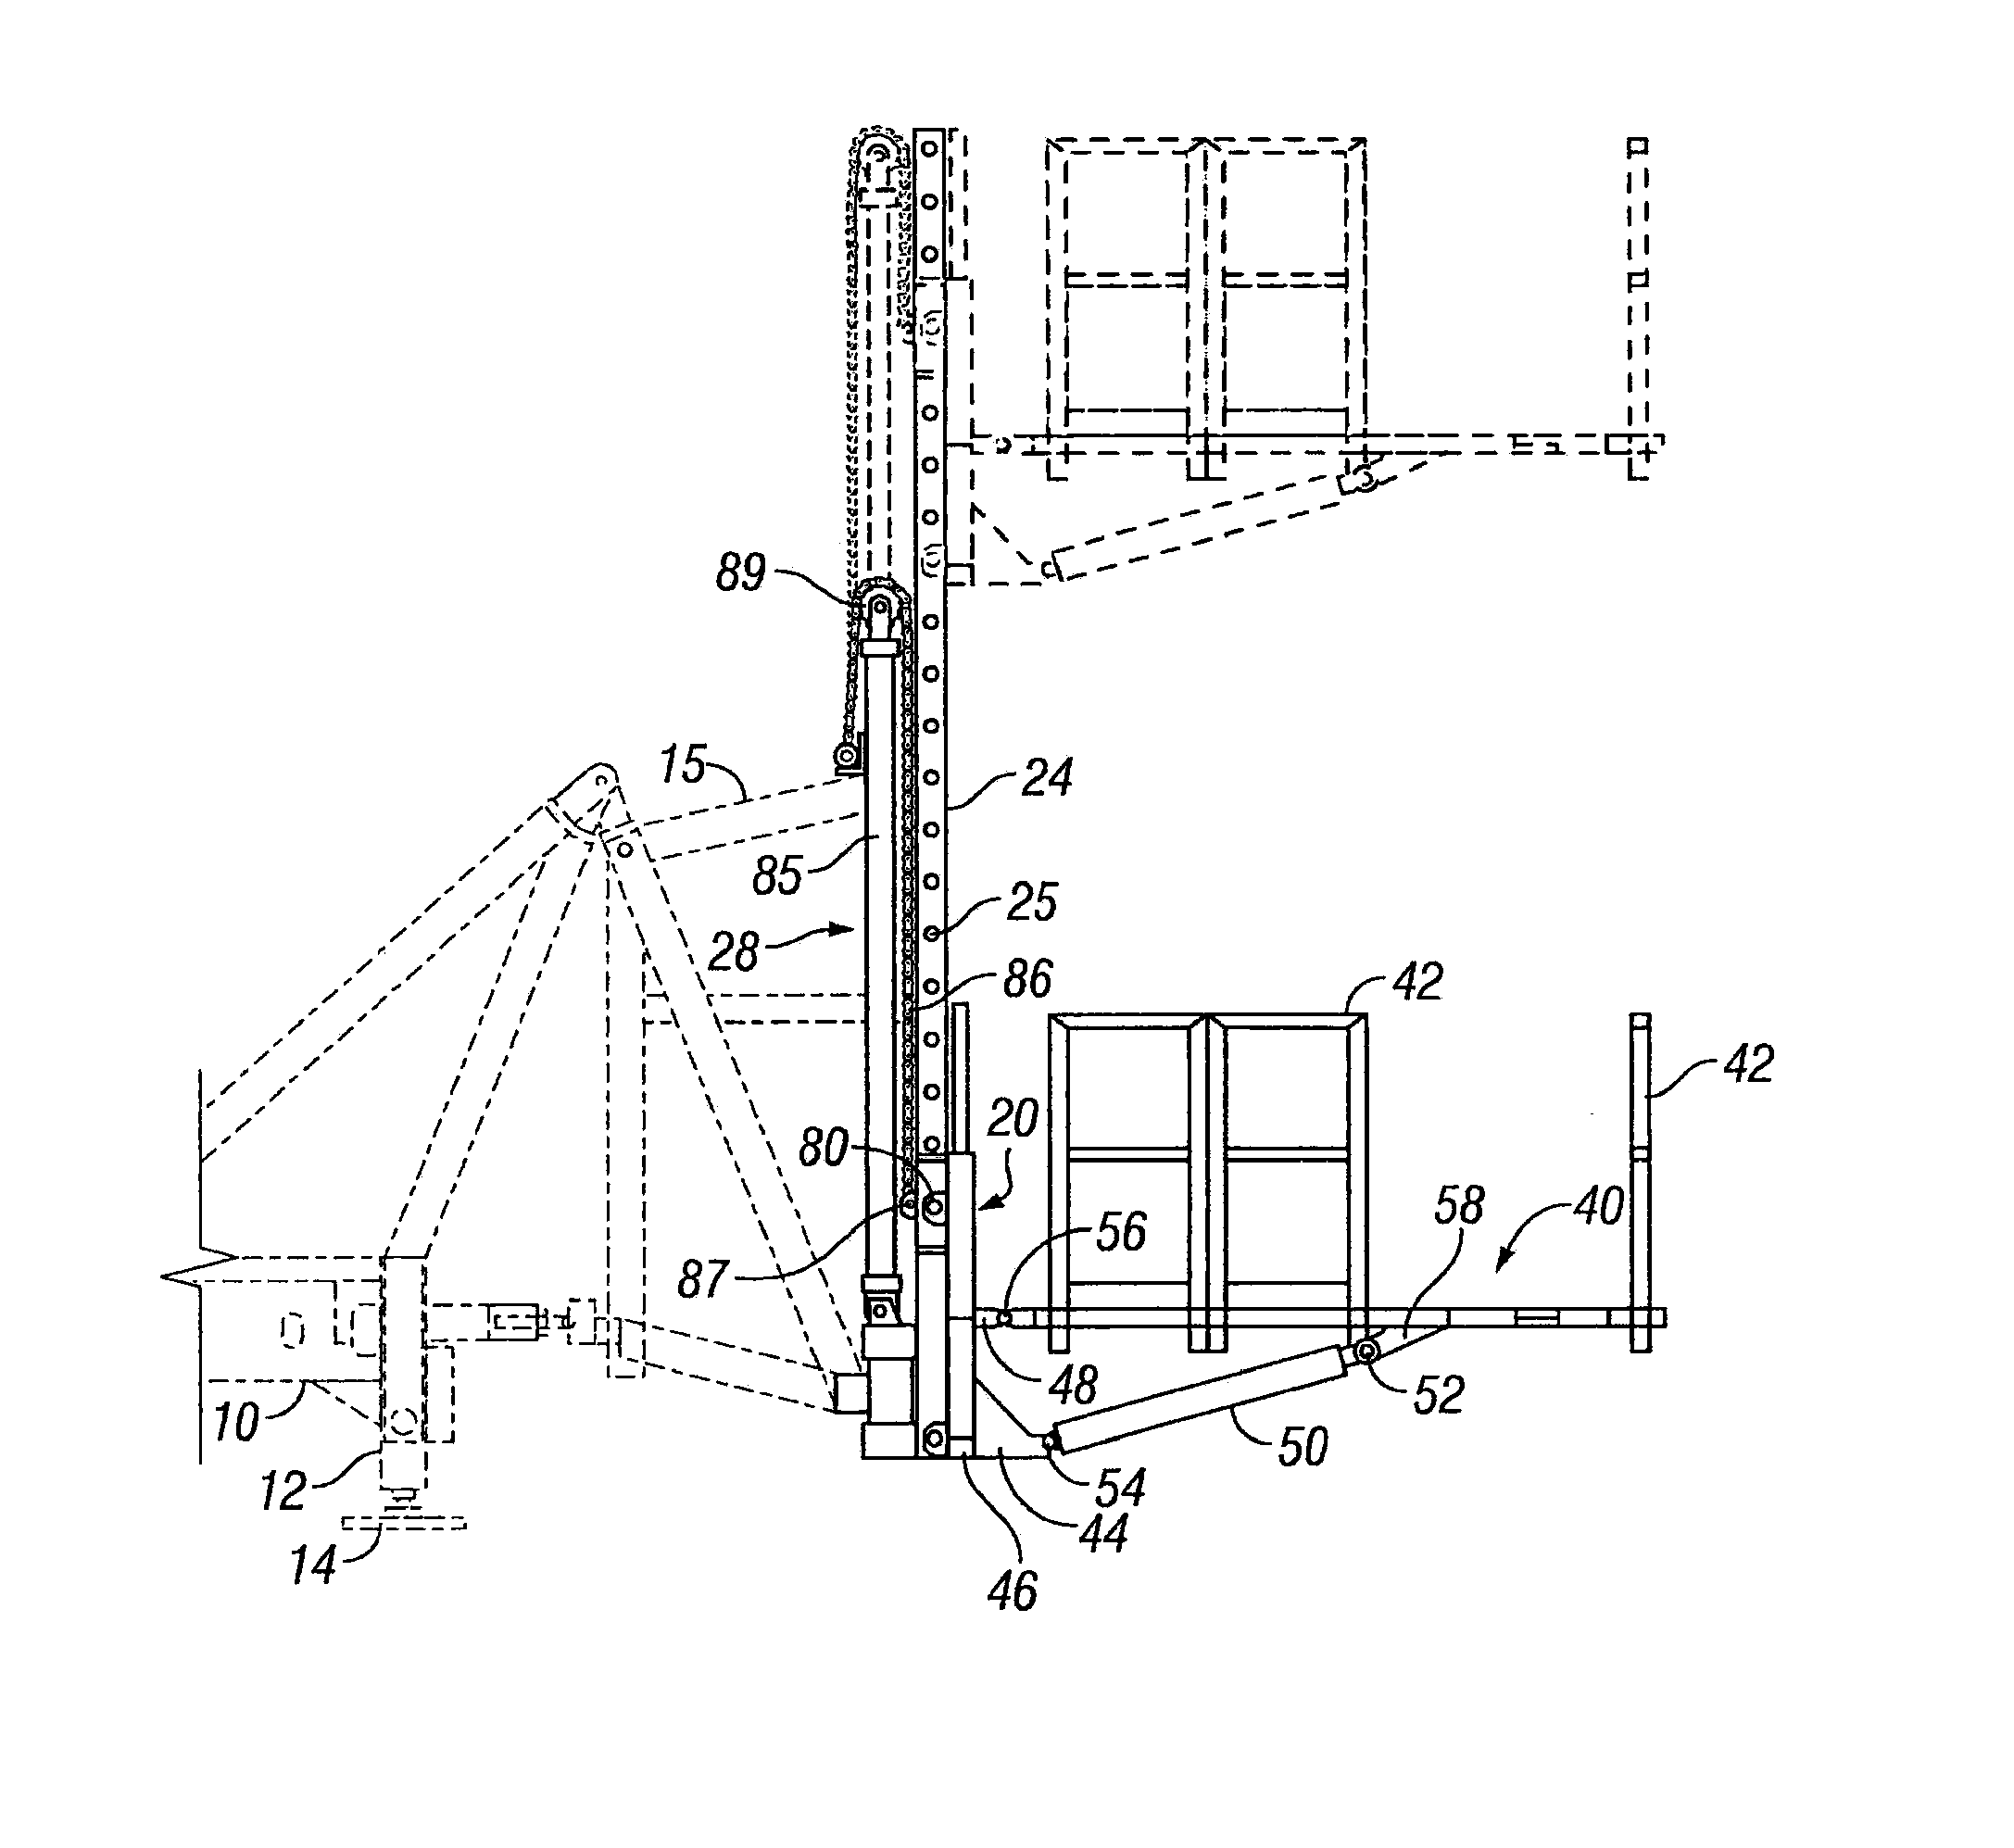 Automated System for Positioning and Supporting the Work Platform of a Mobile Workover and Well-Servicing Rig